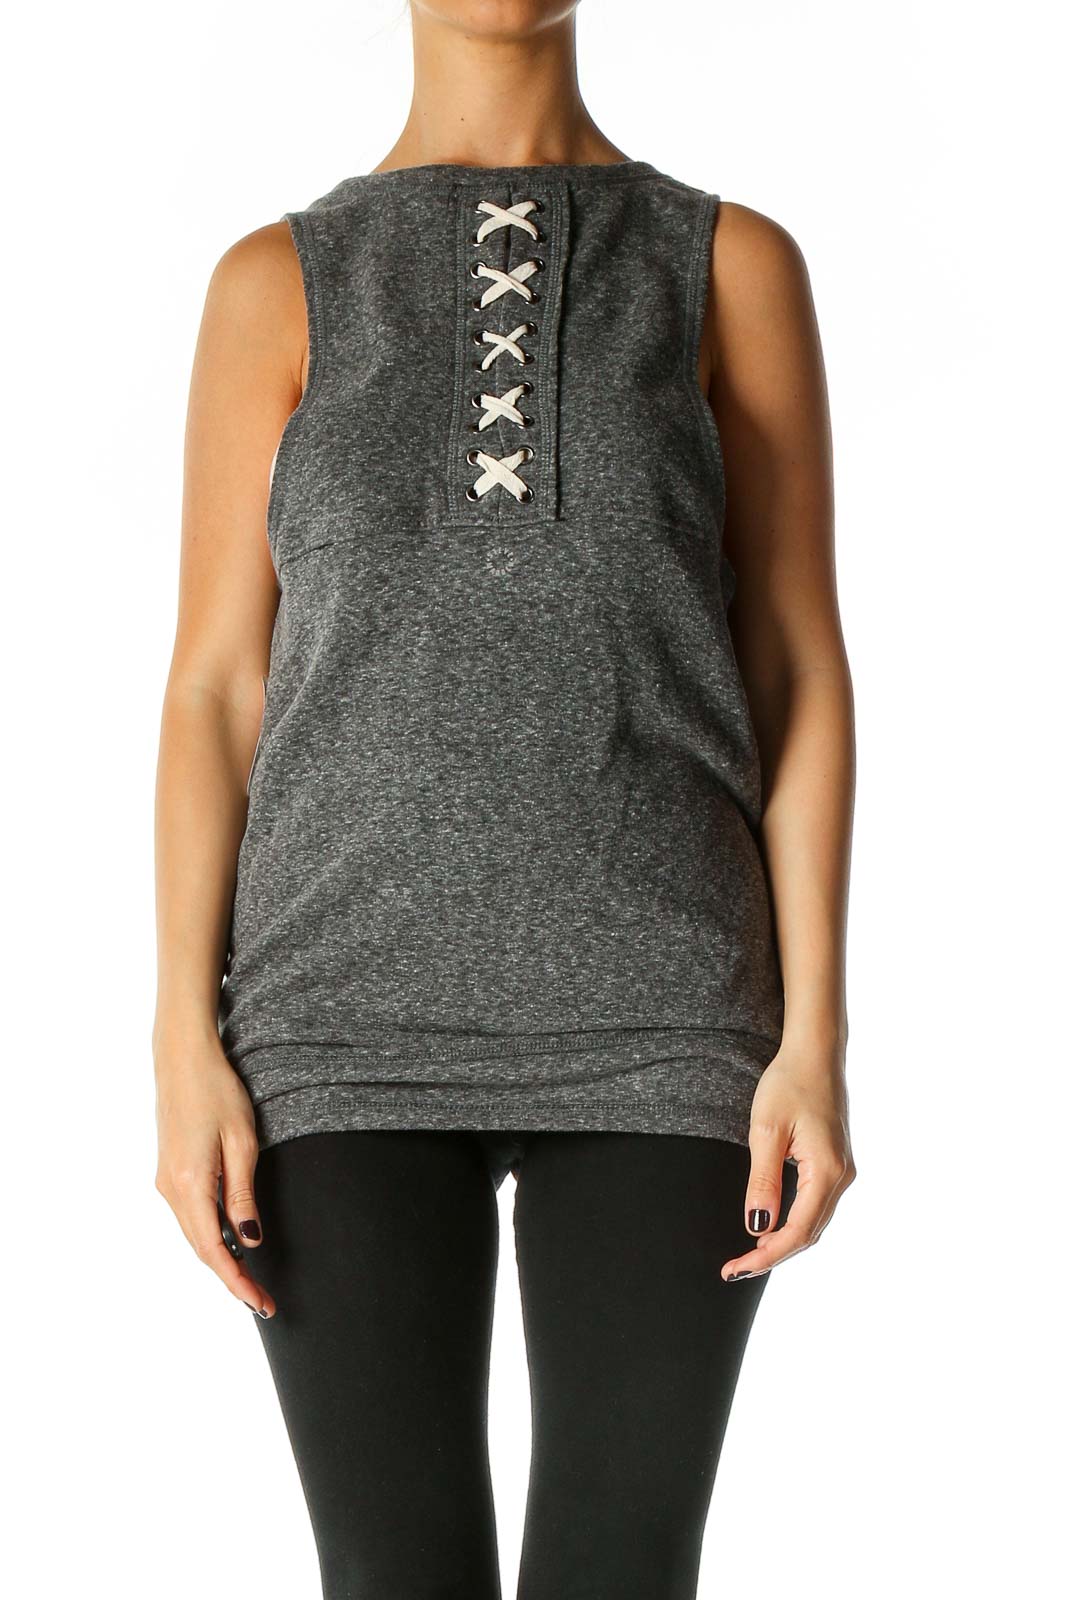 Gray Solid Casual Tank Top Front